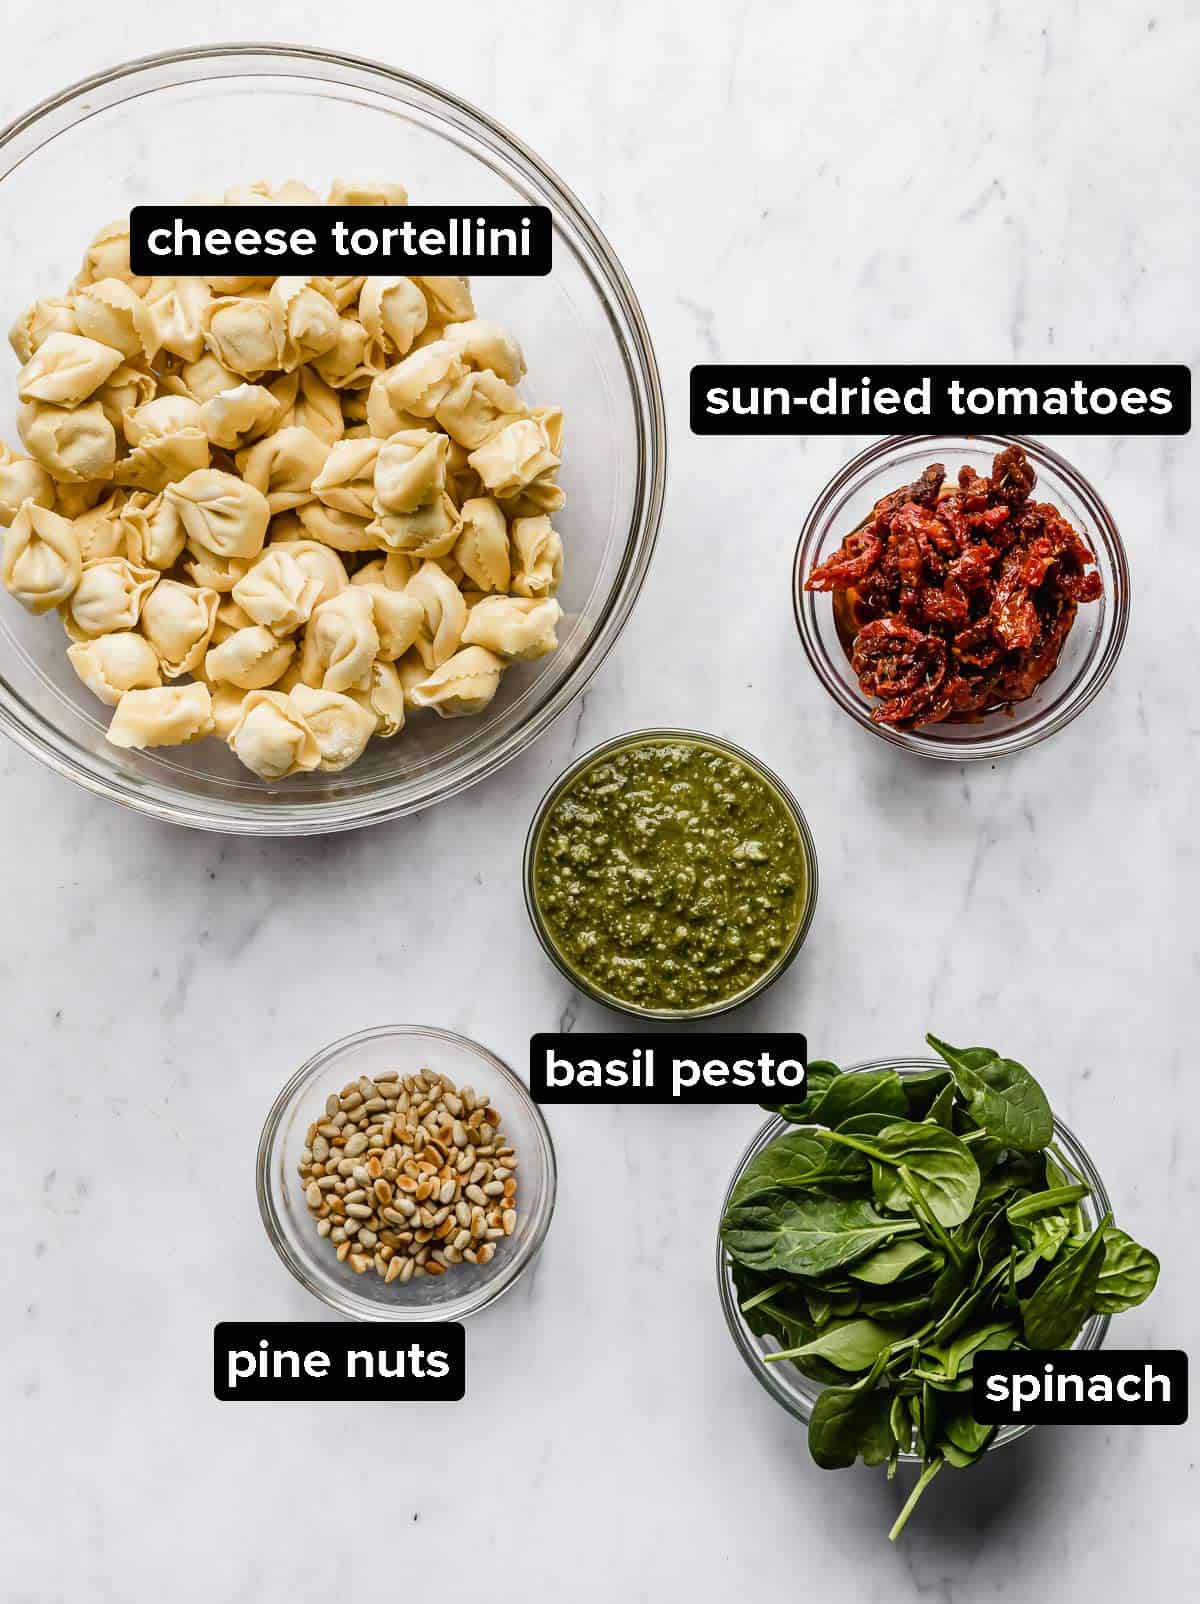 Ingredients used to make Pesto Tortellini Pasta Salad, portioned into glass bowls: tortellini, pesto, sun-dried tomatoes, pine nuts, and optional spinach.